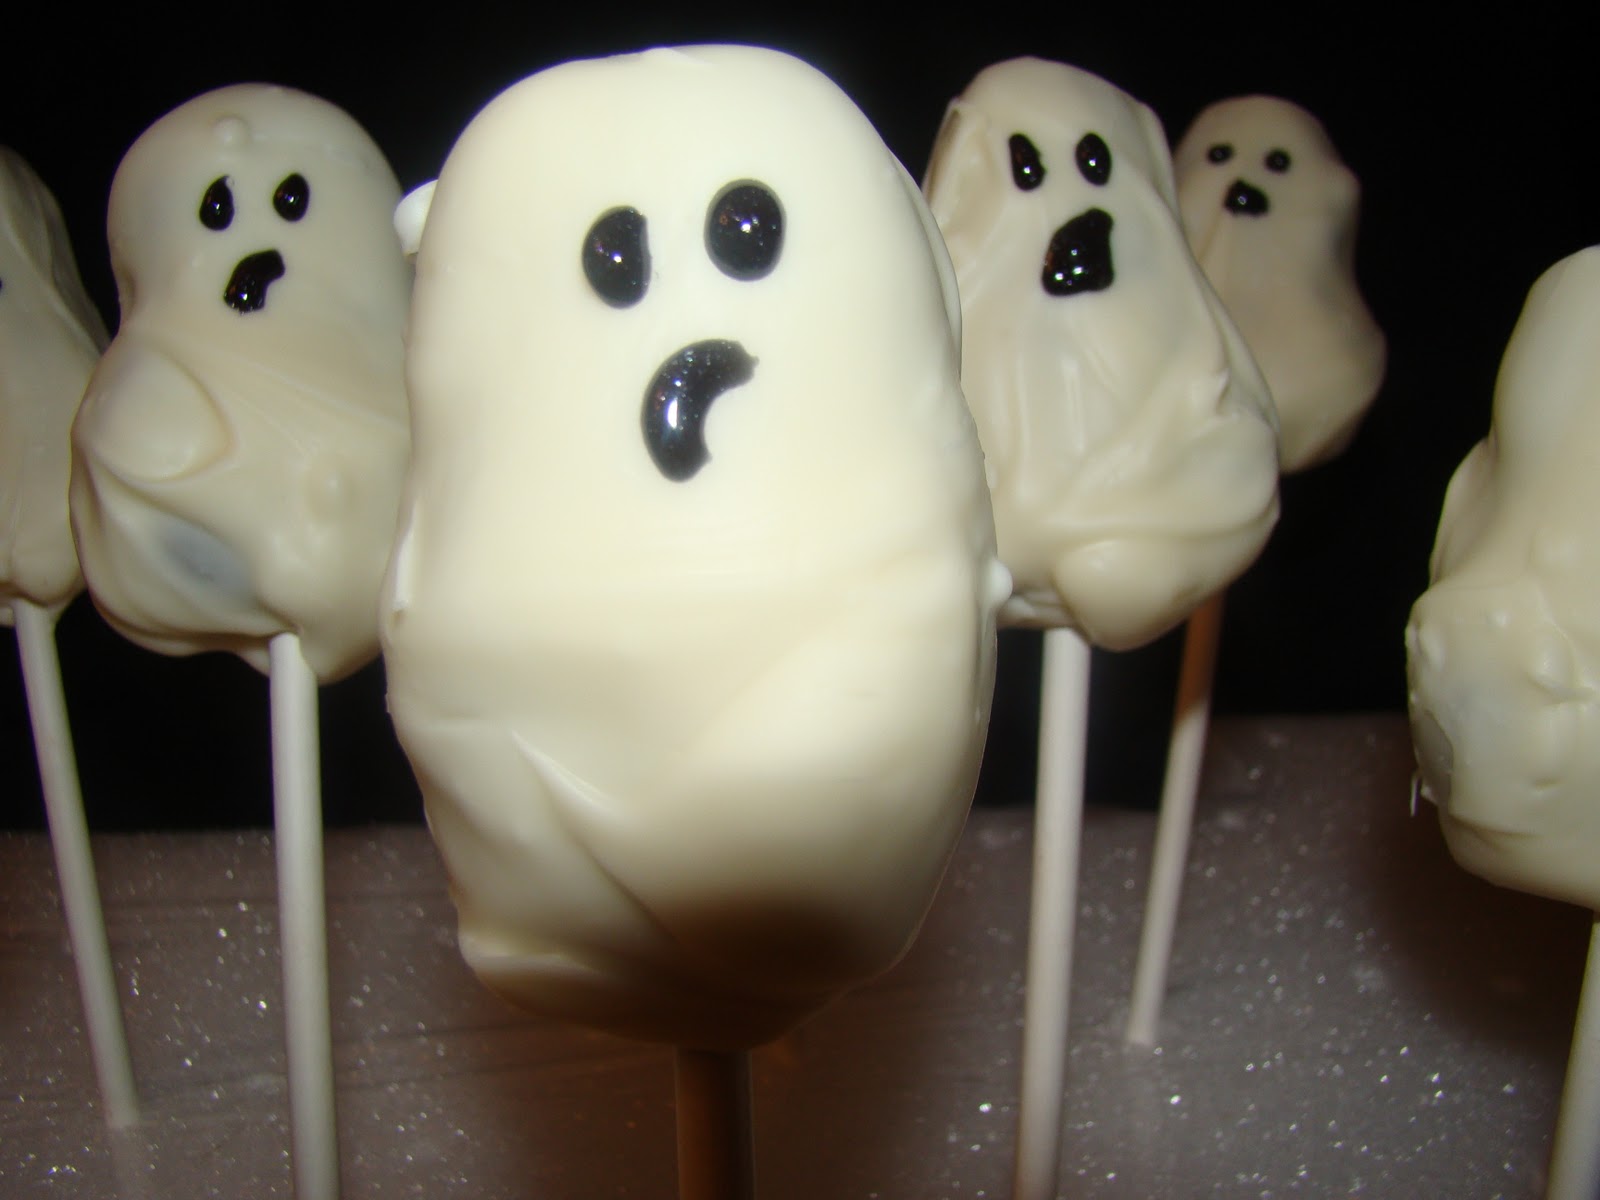 halloween ghost cake pops halloween is such a fun holiday here are some ghost cake pops i made